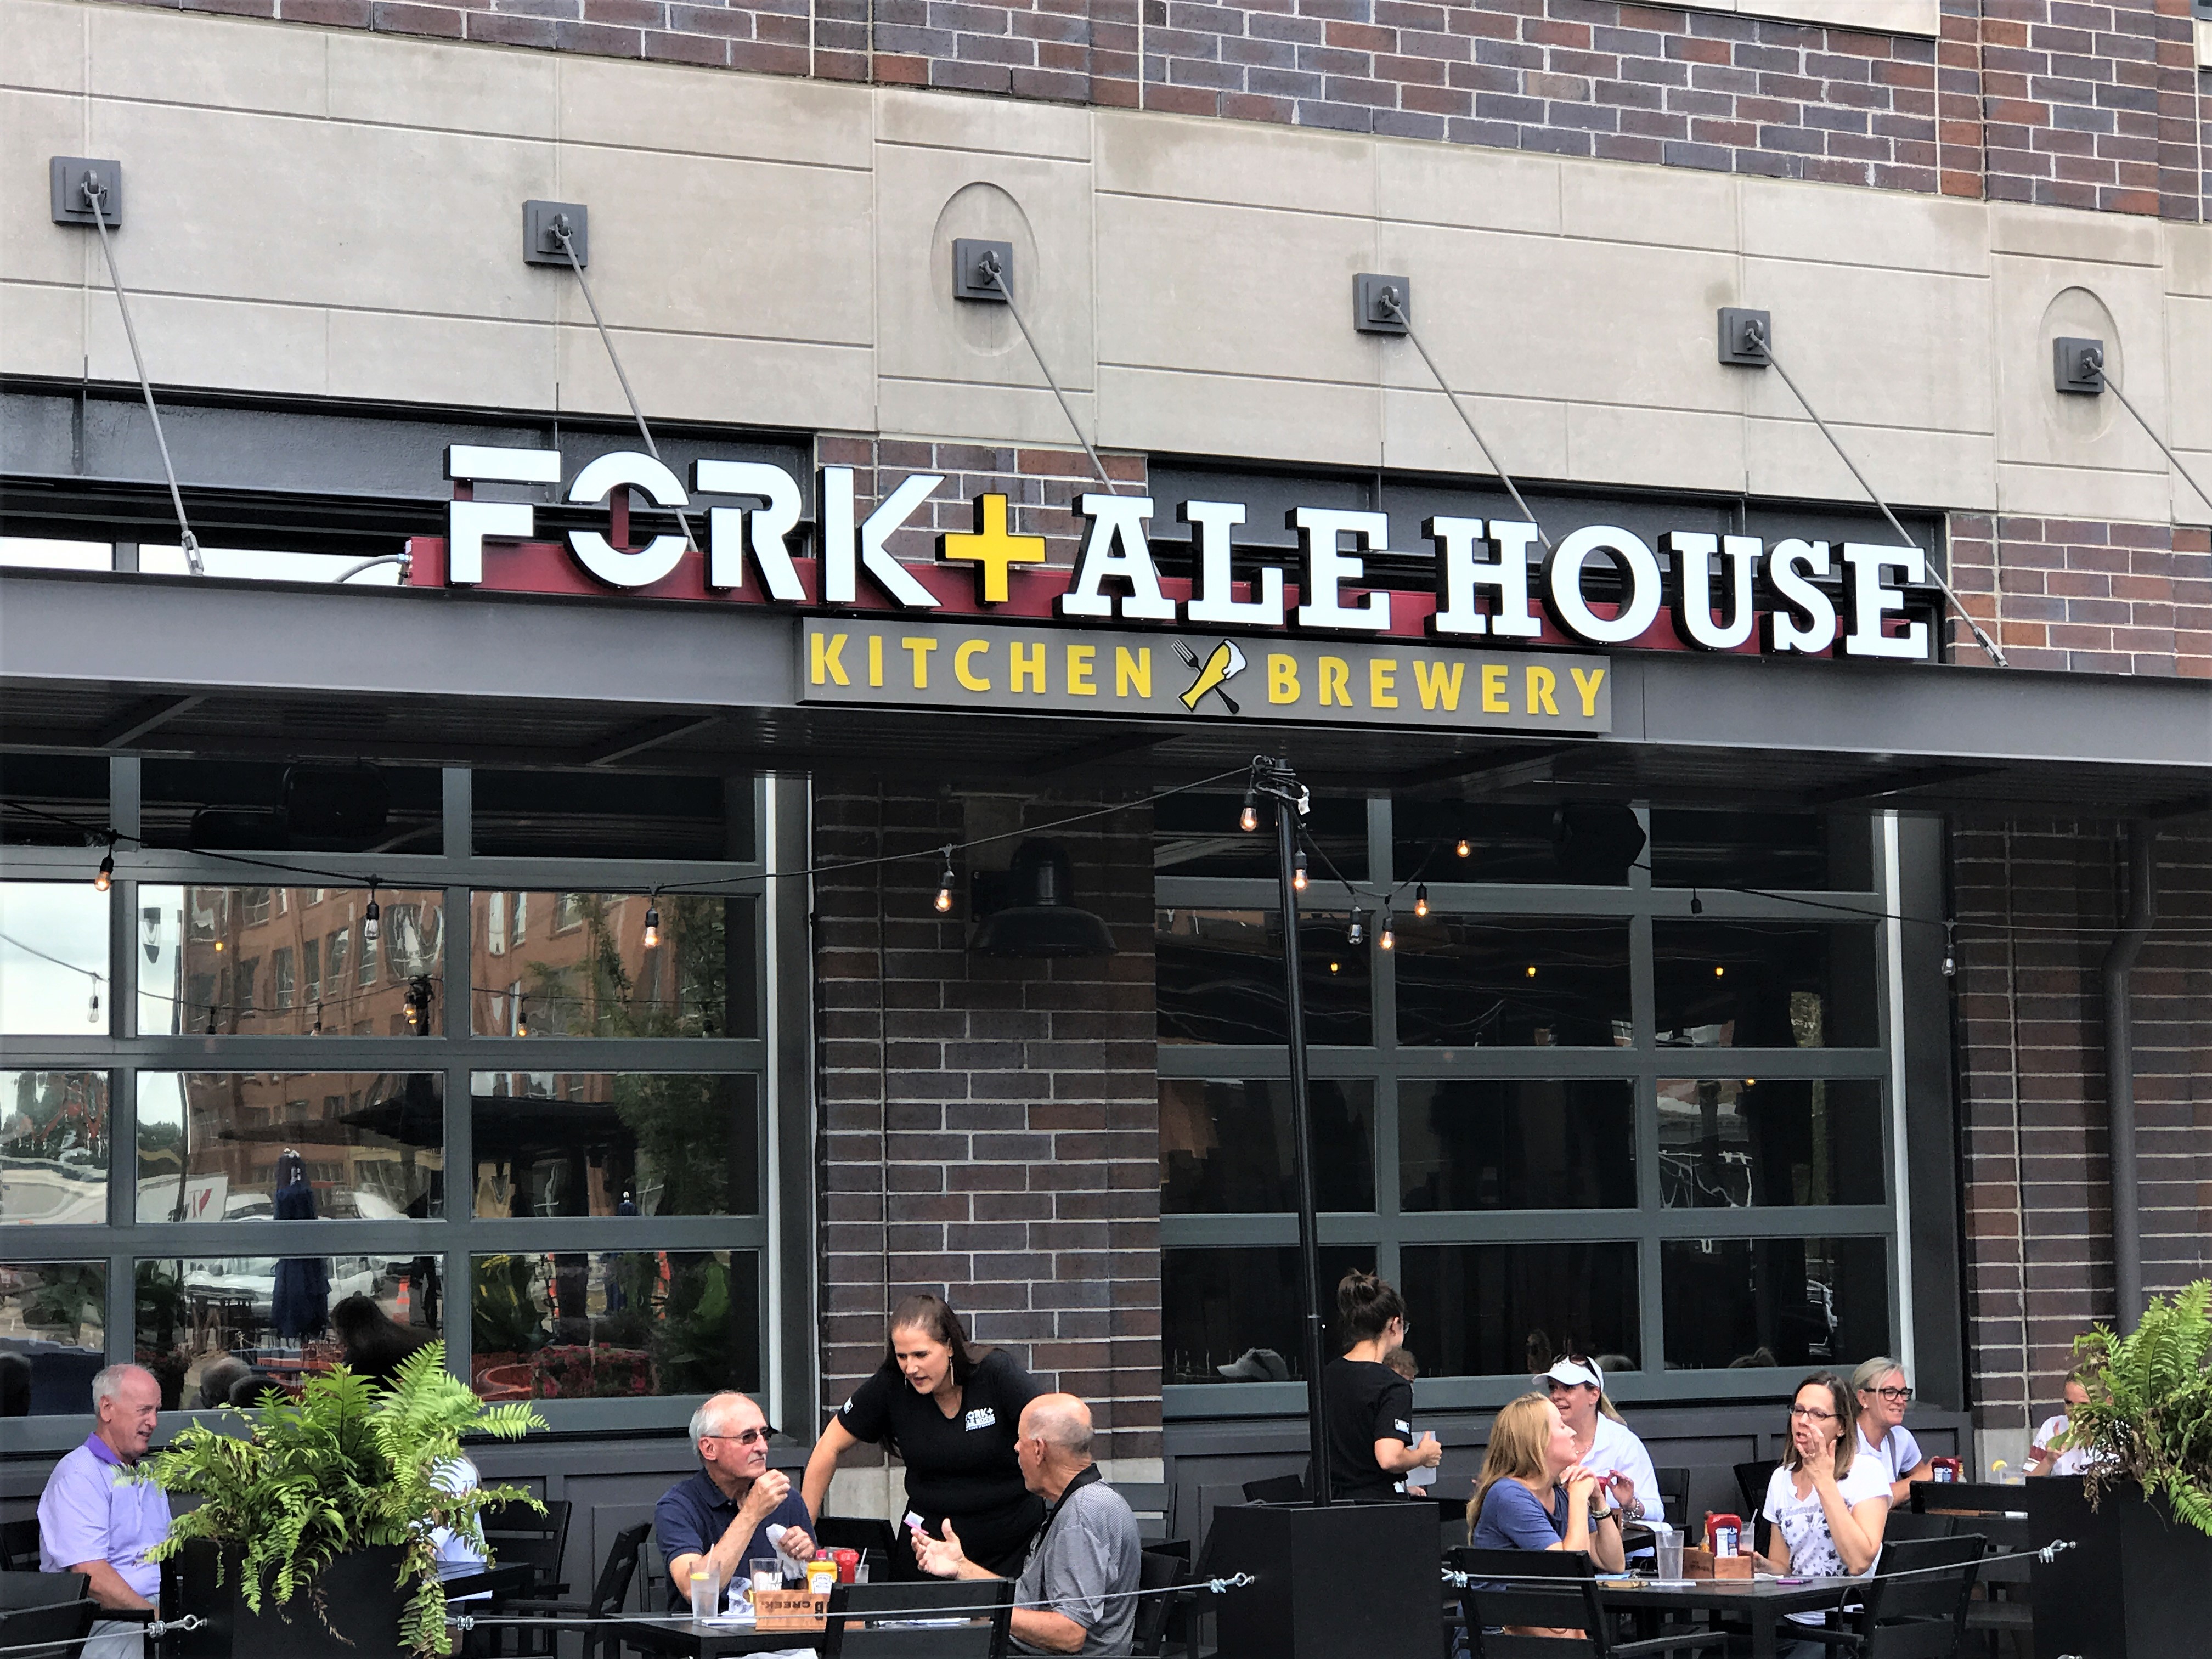 Fork + Ale House in Carmel, Indiana